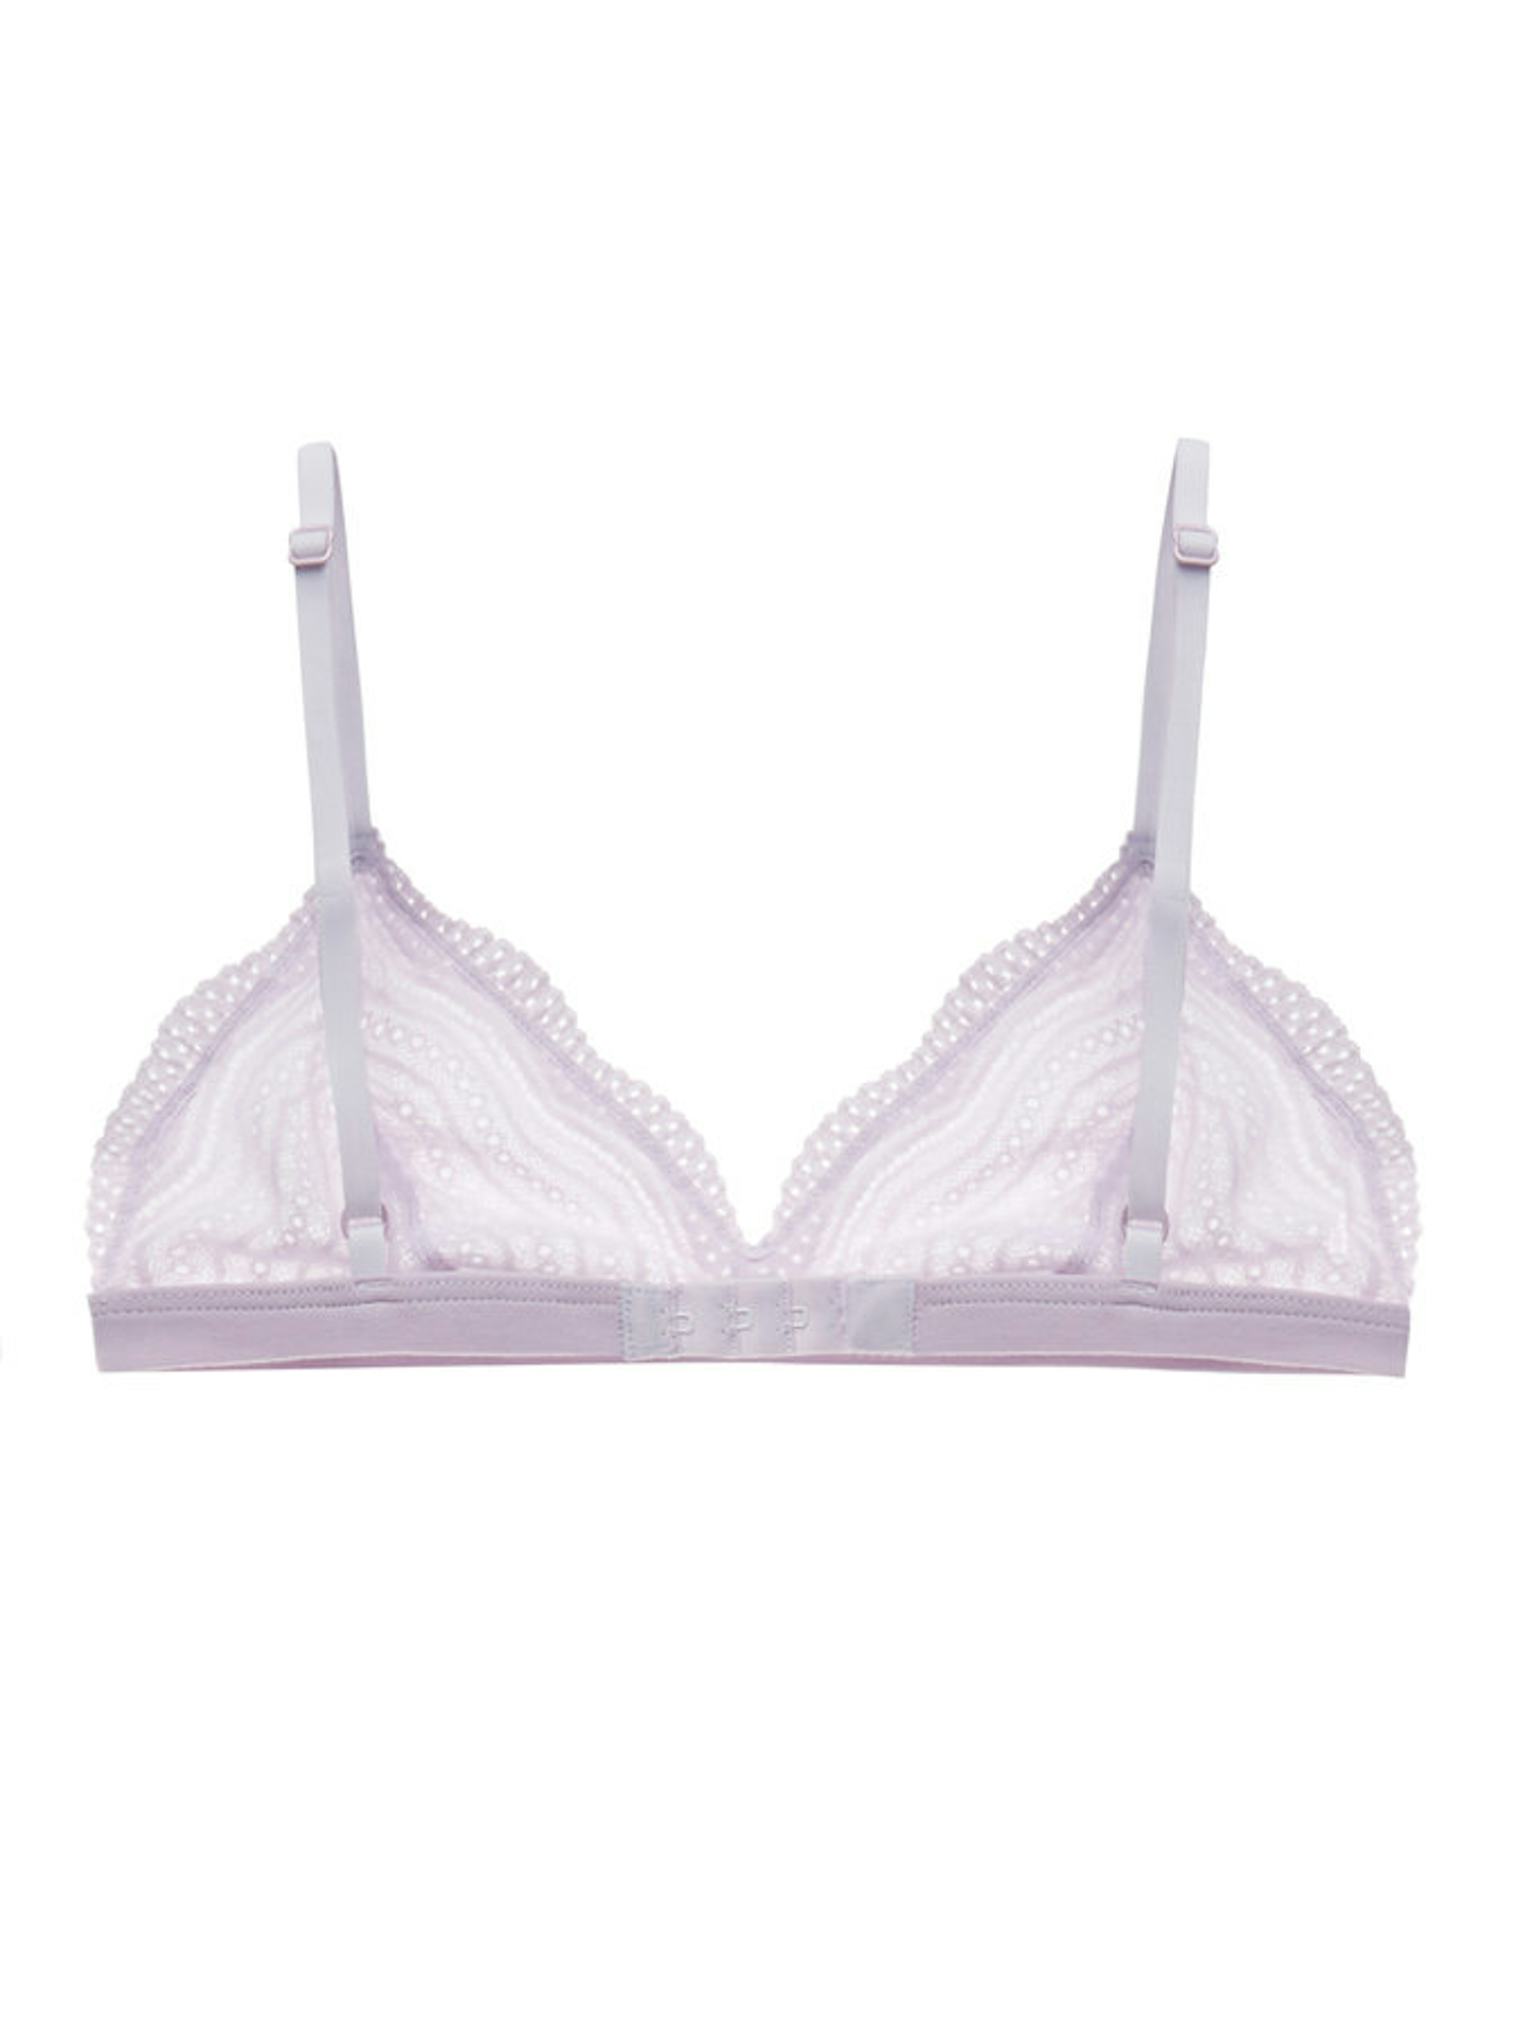 11 Bras That Don't Feel Like Bras, Because They Shouldn't Always Feel ...